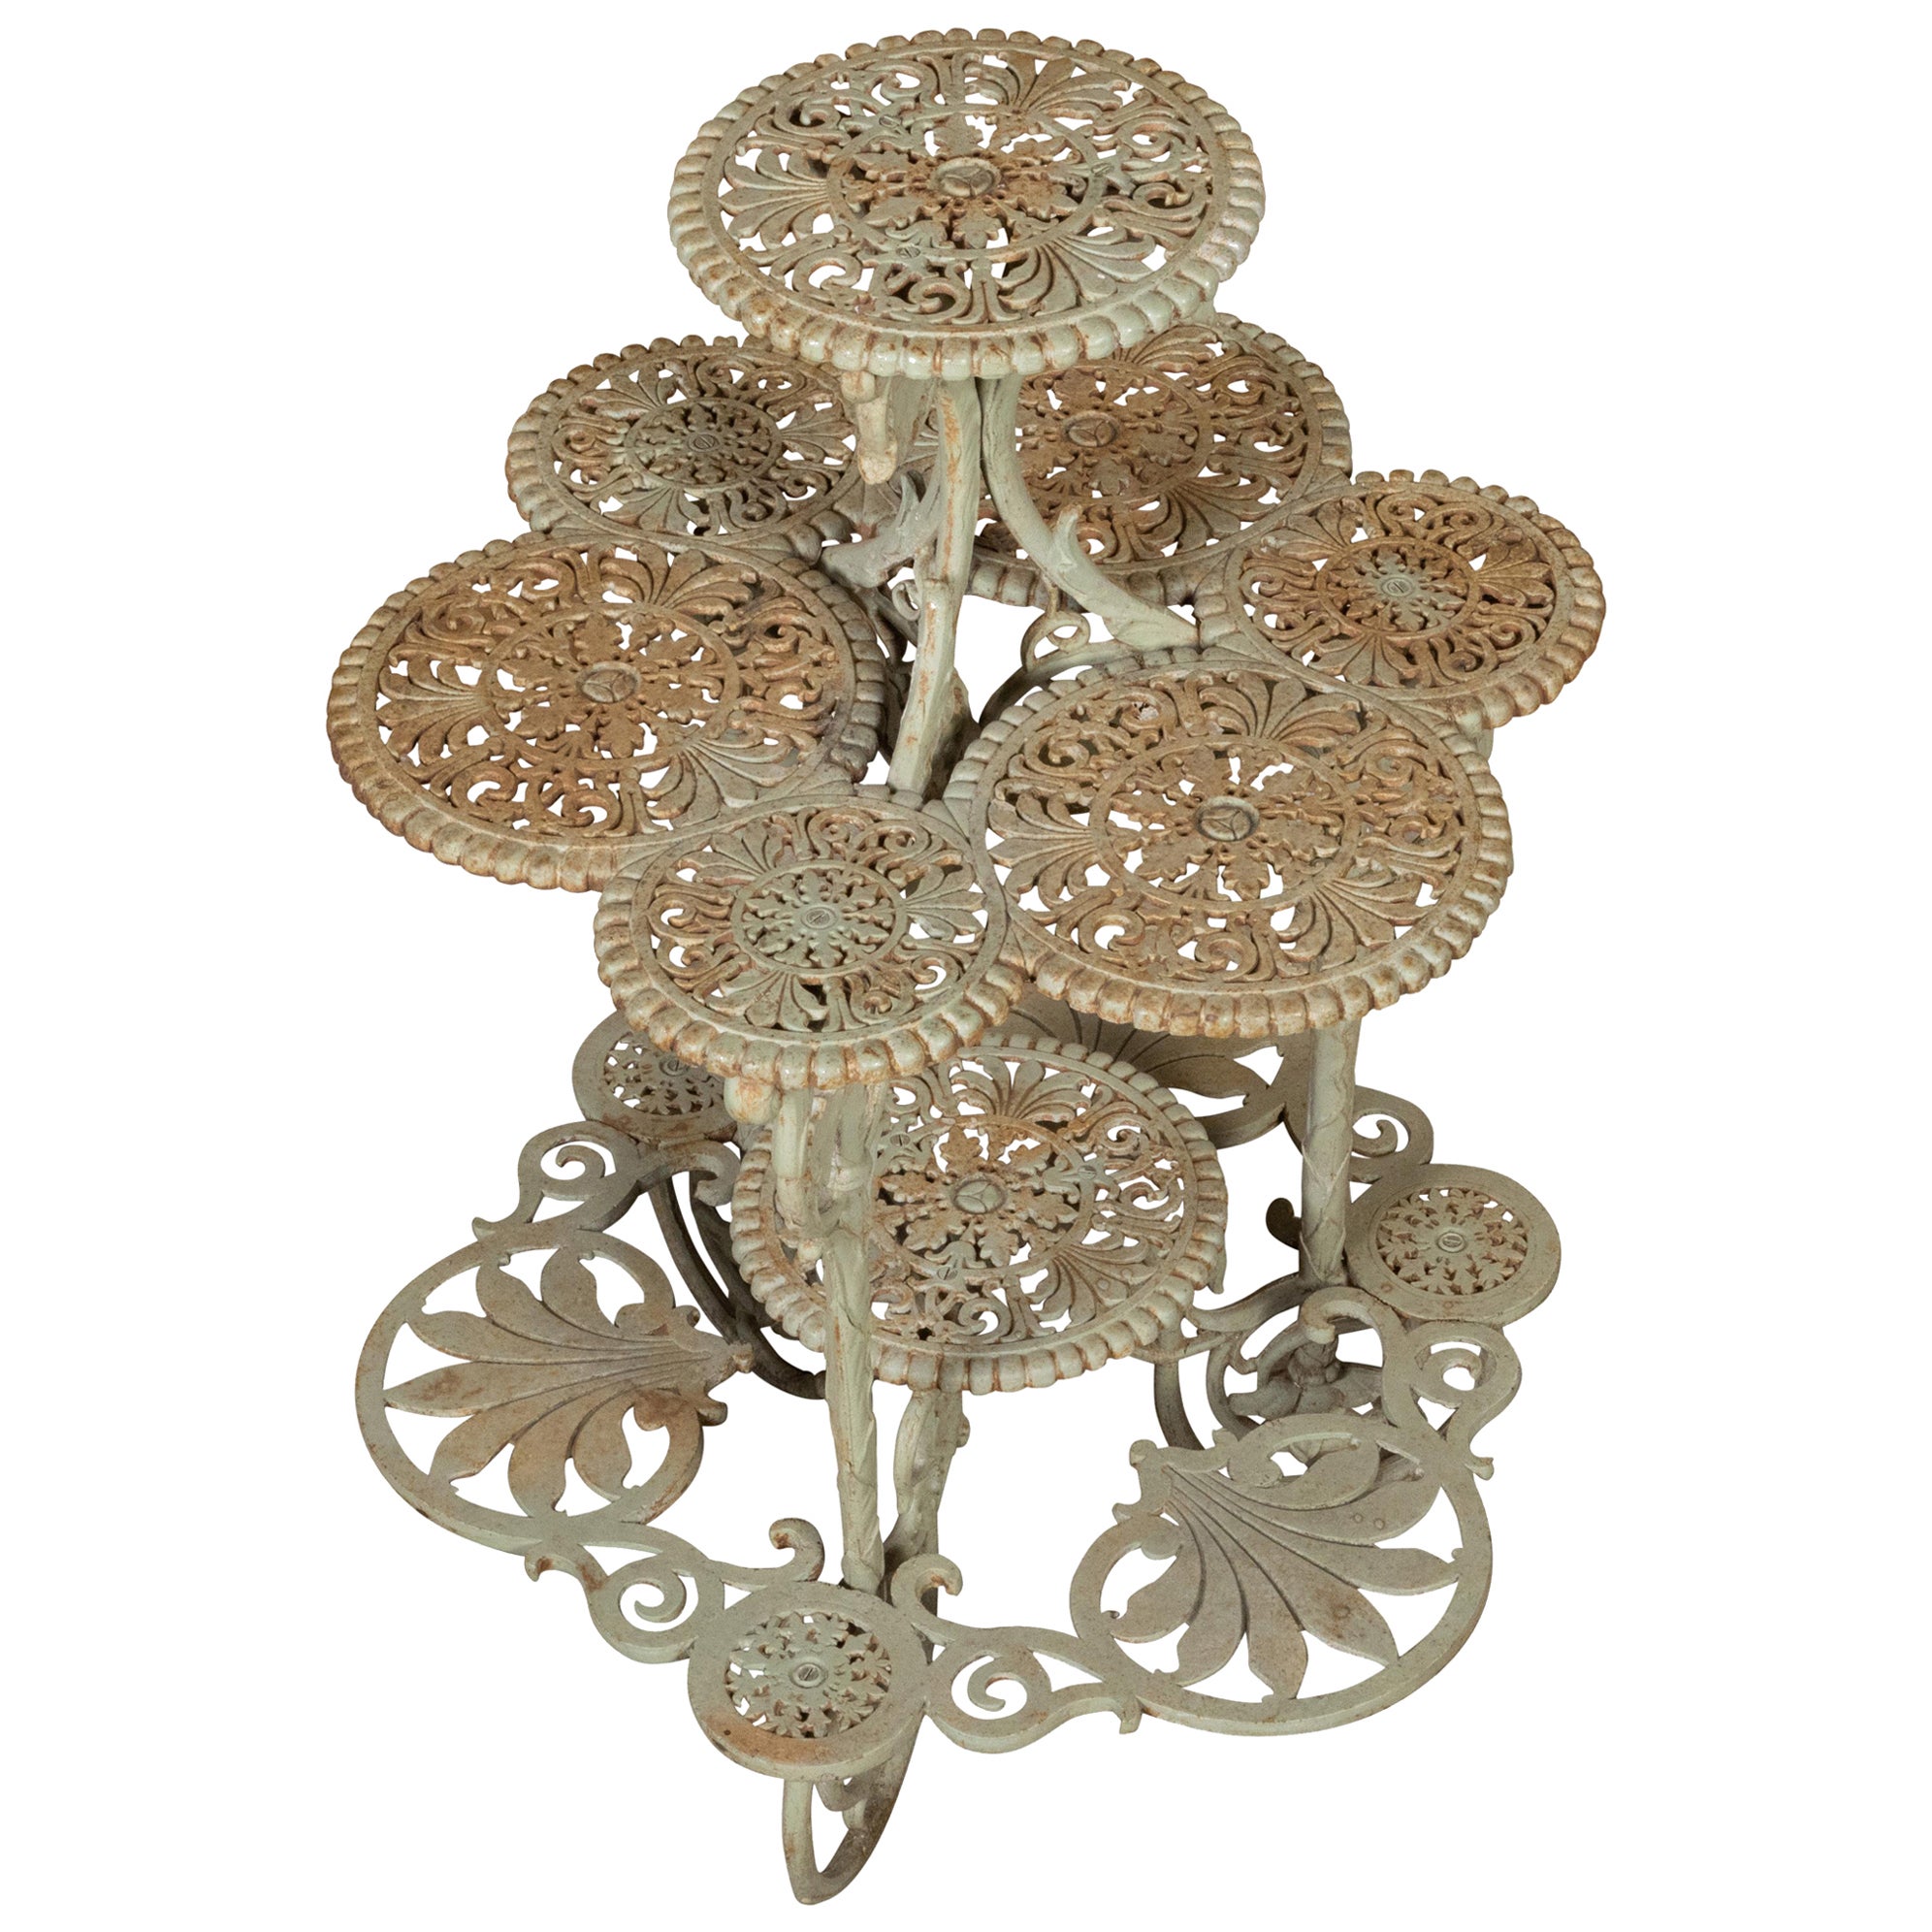 English 19th Century Painted Iron Four-Tiered Table with Foliage Openwork Motifs